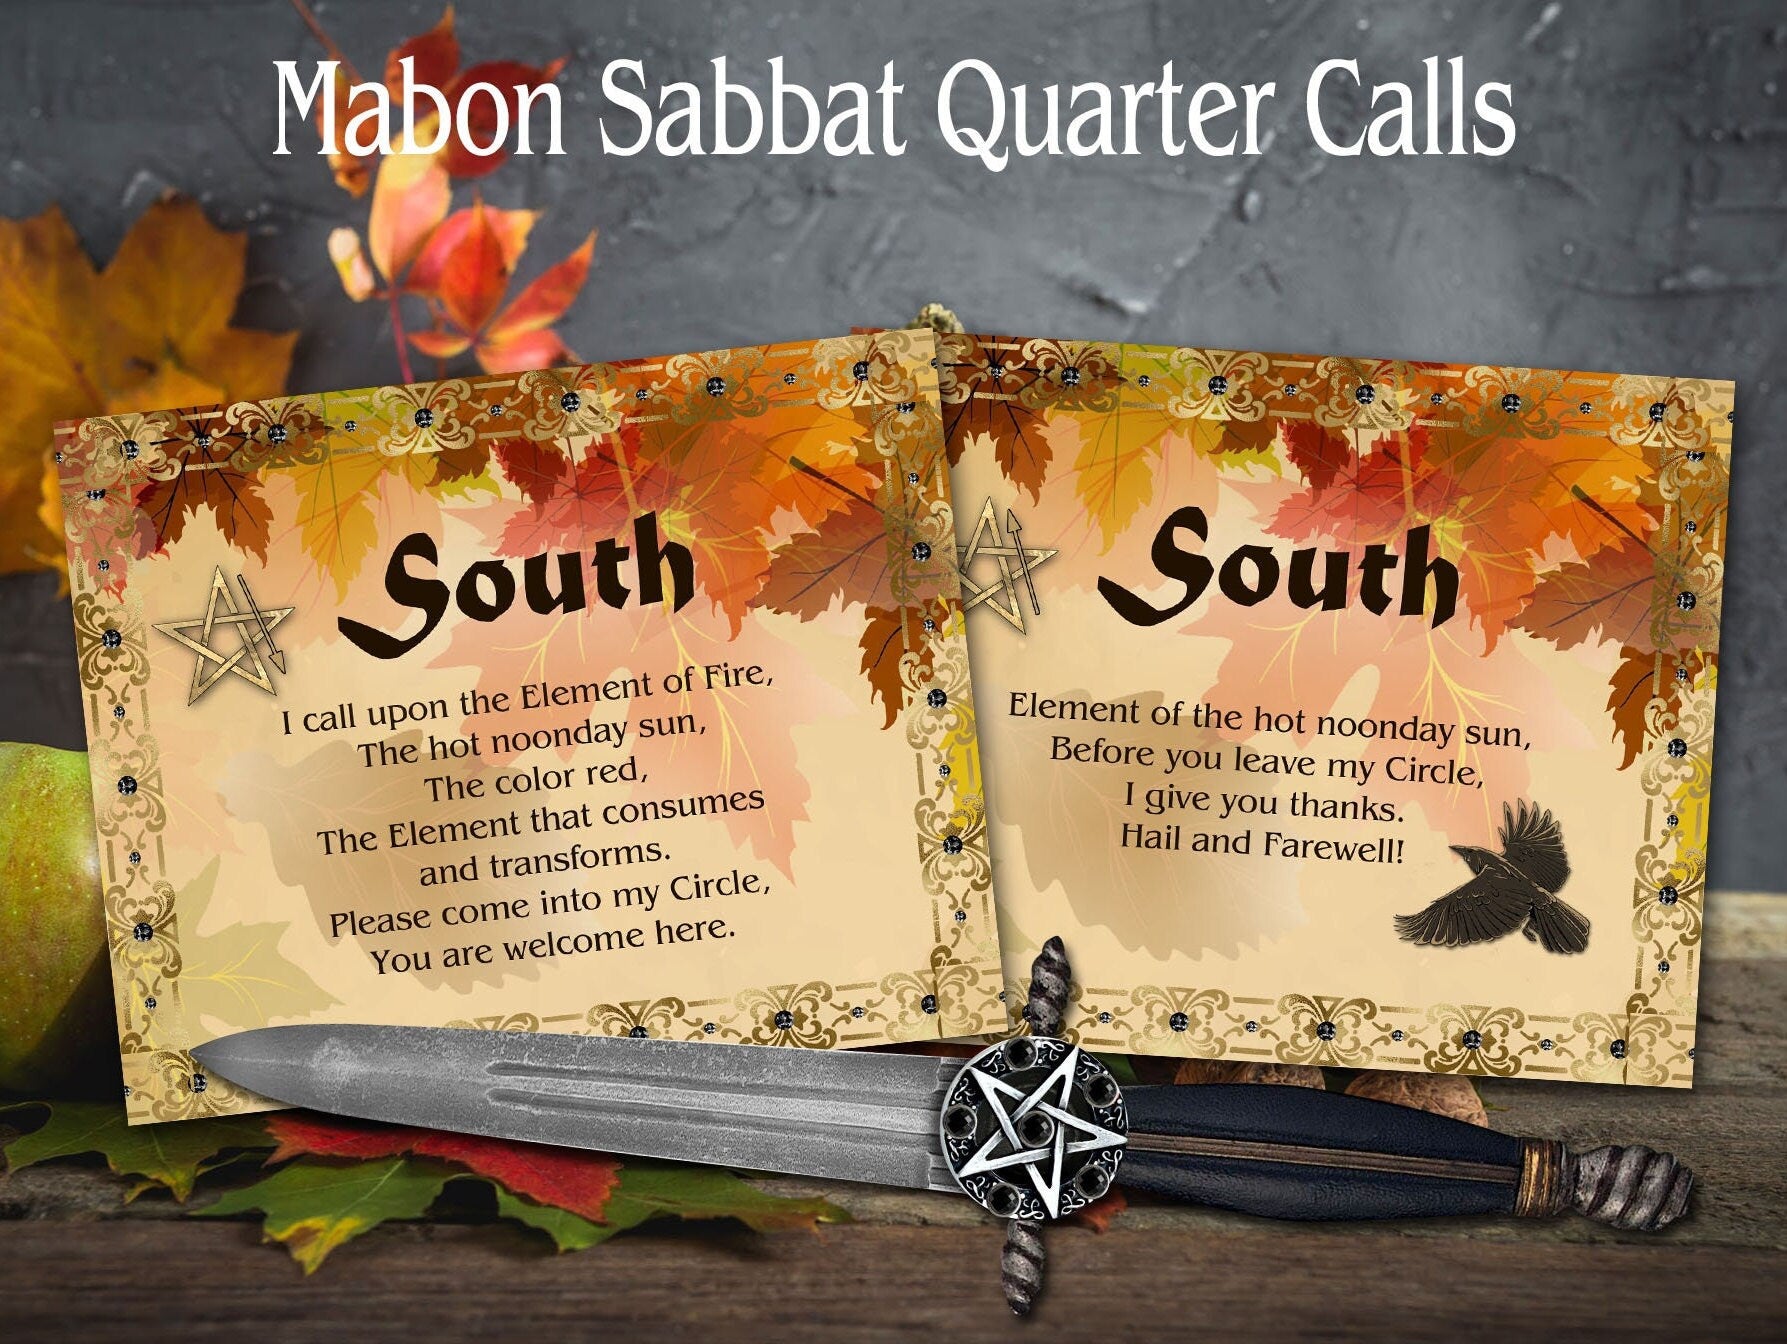 SOUTH QUARTER CALLS, 2 Cards to Call and Release the Quarters, with invoking and banishing Pentagram diagram included, Printable Cards - Morgana Magick Spell